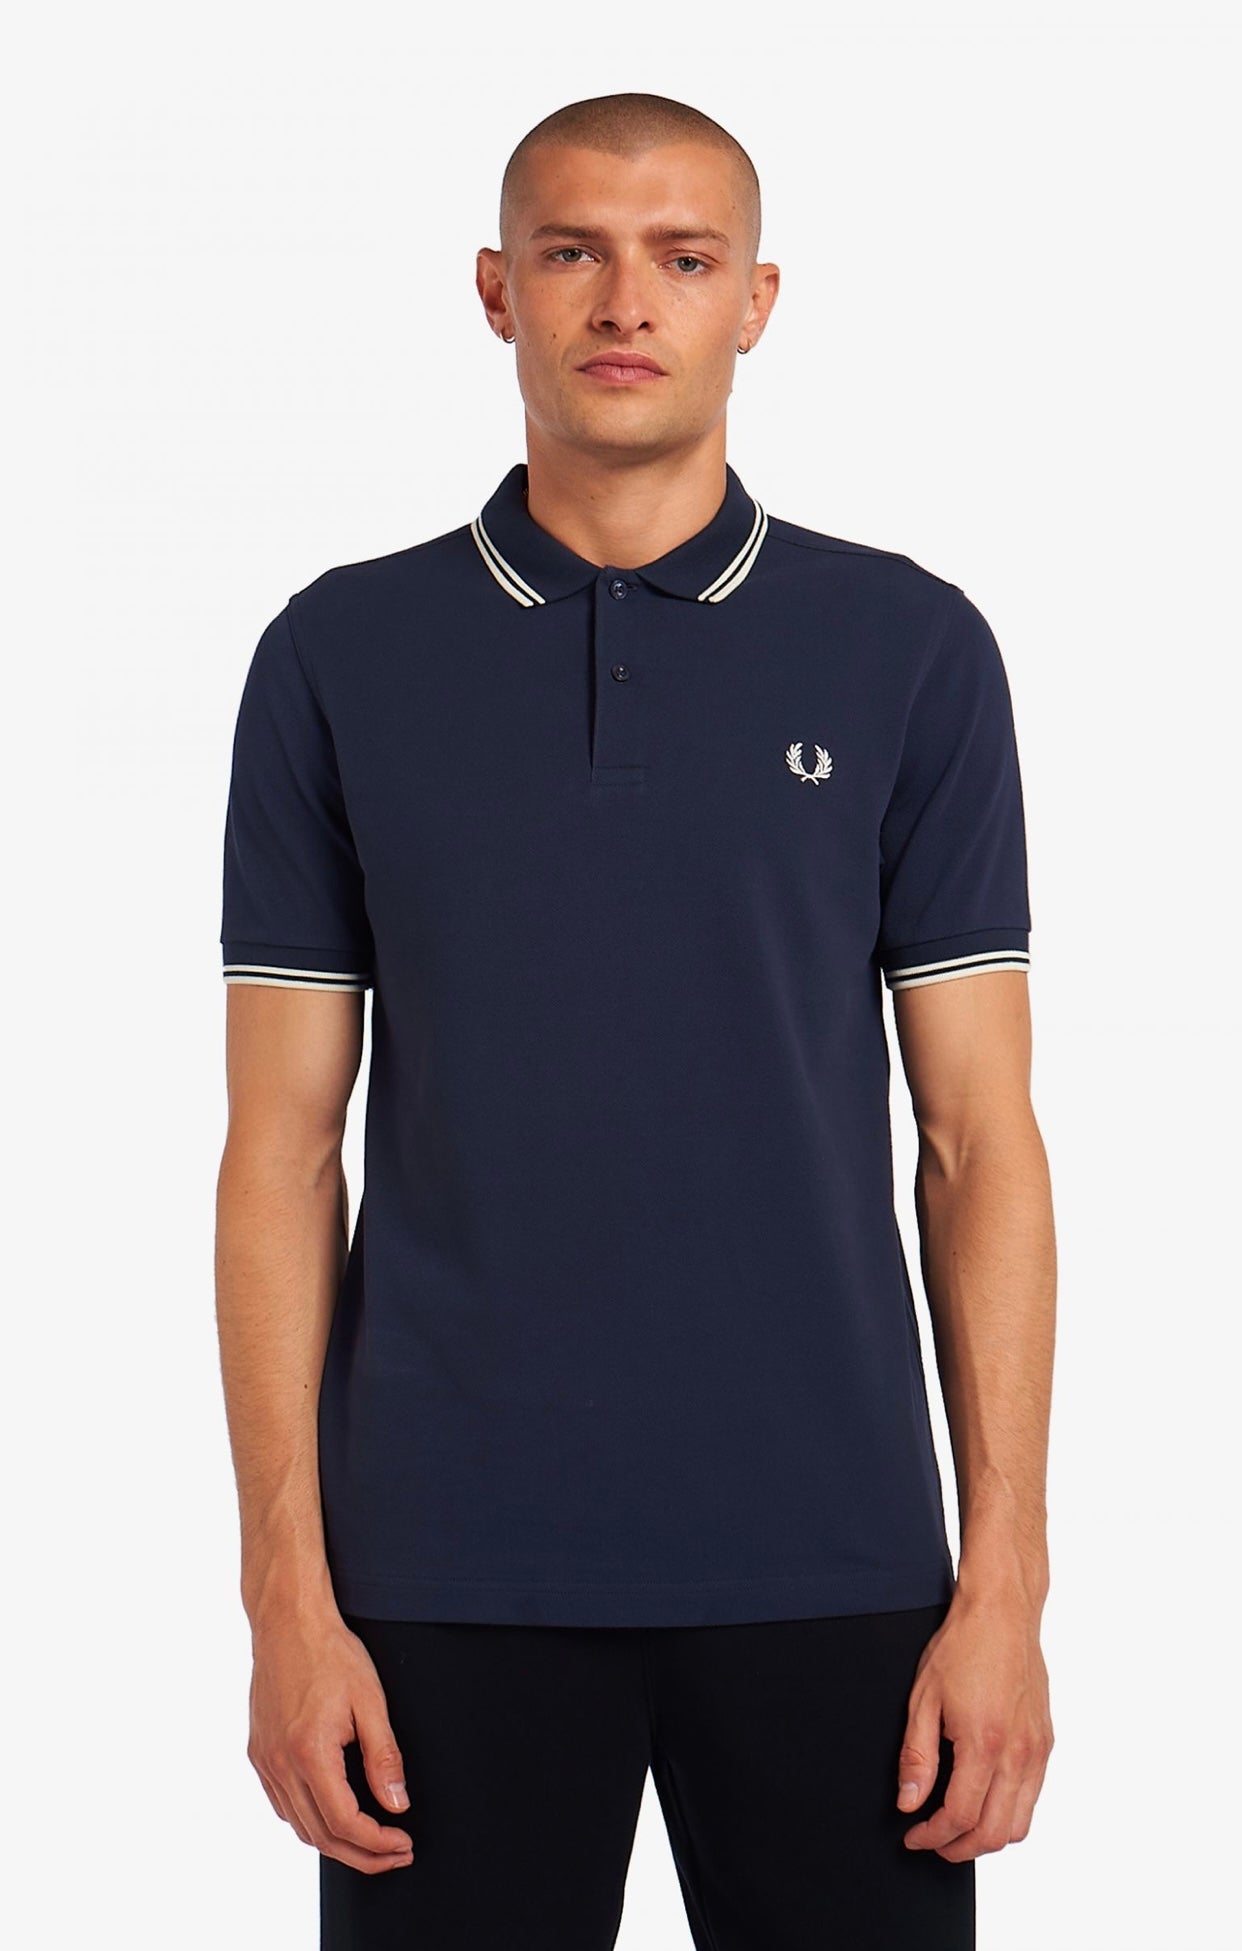 Twin Tipped Fred Perry Shirts (7 polos)